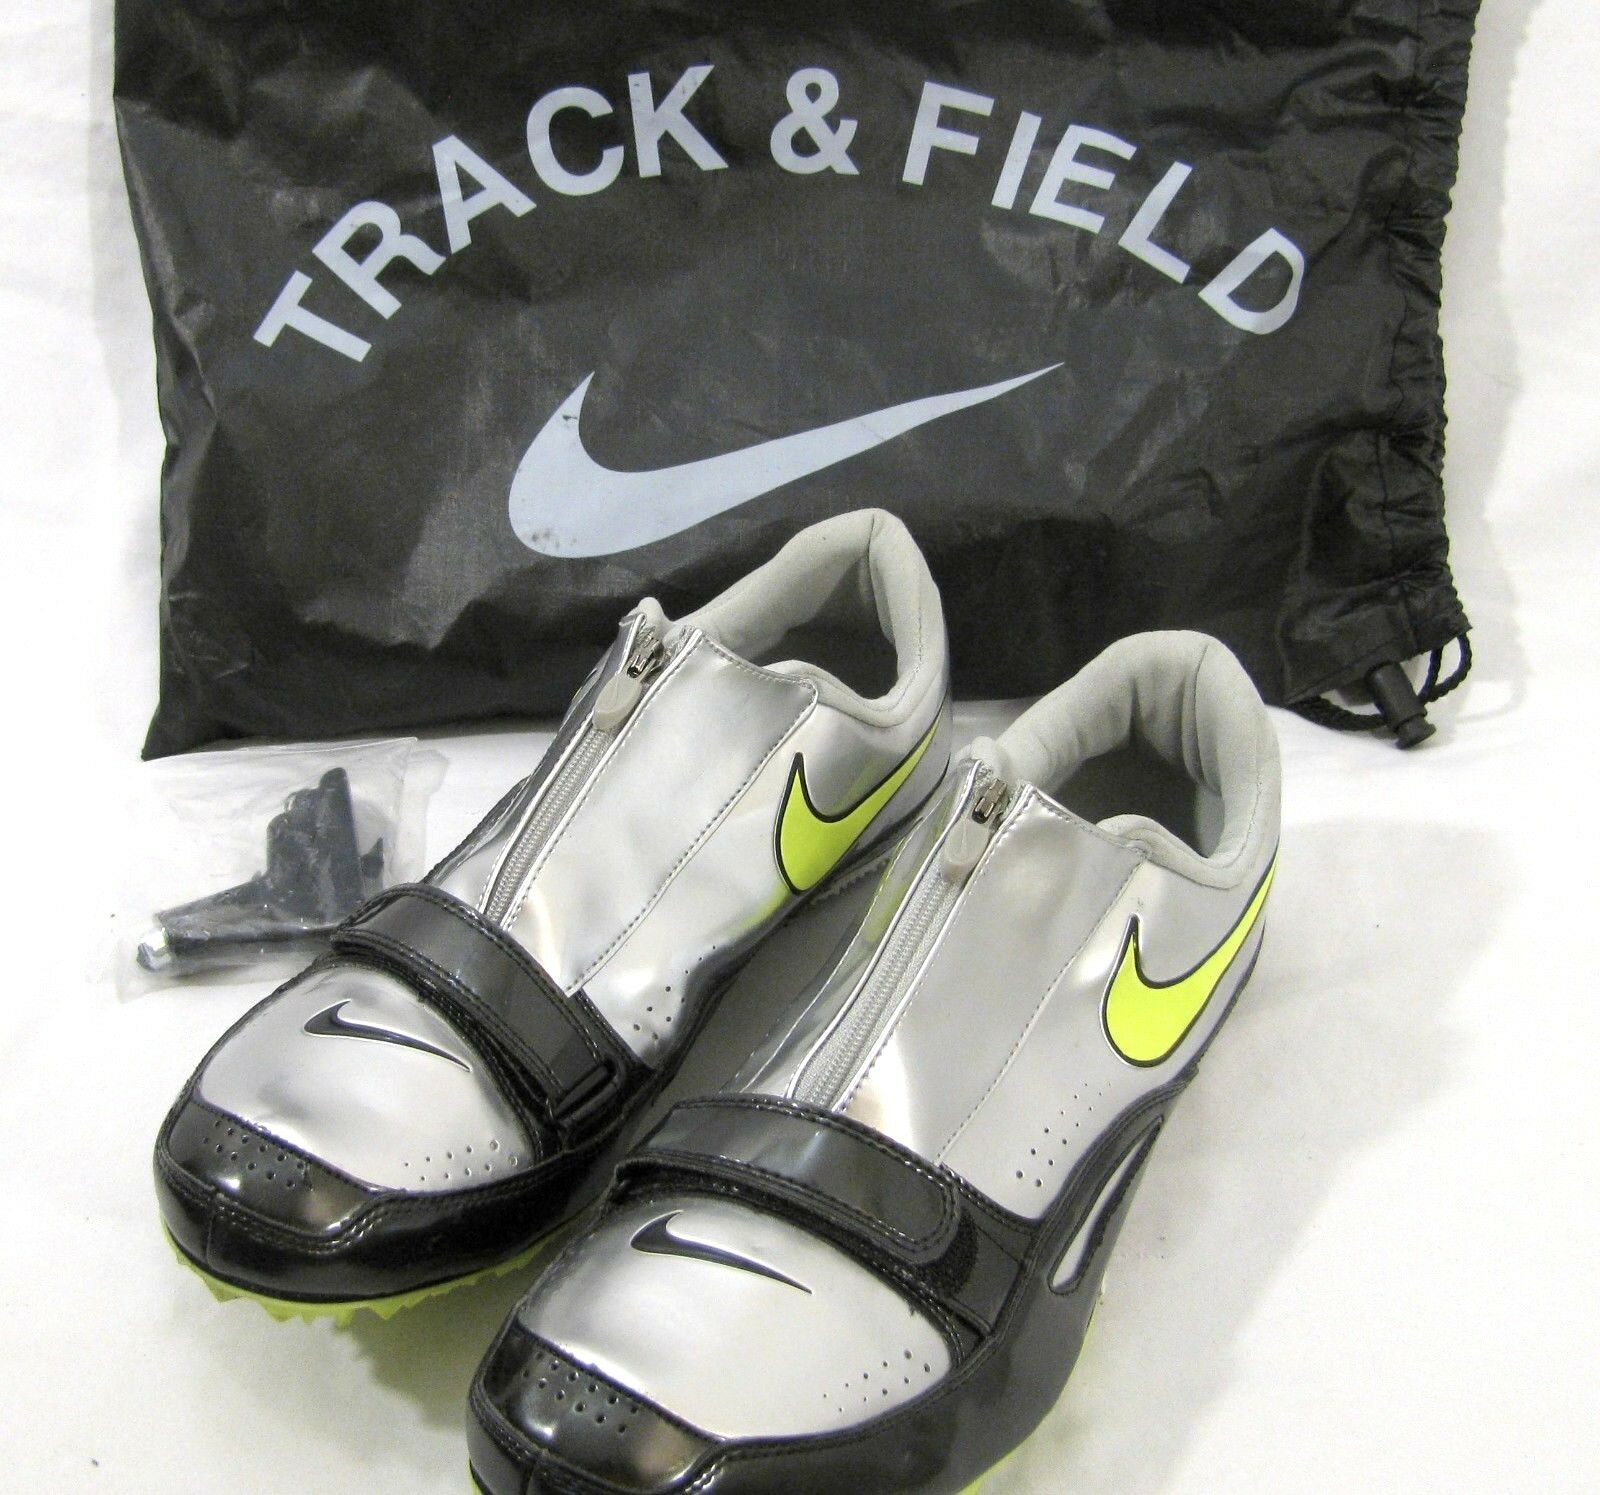 Nike Track & Field Spikes Shoe Mens Size 11 Silver Black Nwot Spike Wrench Tool